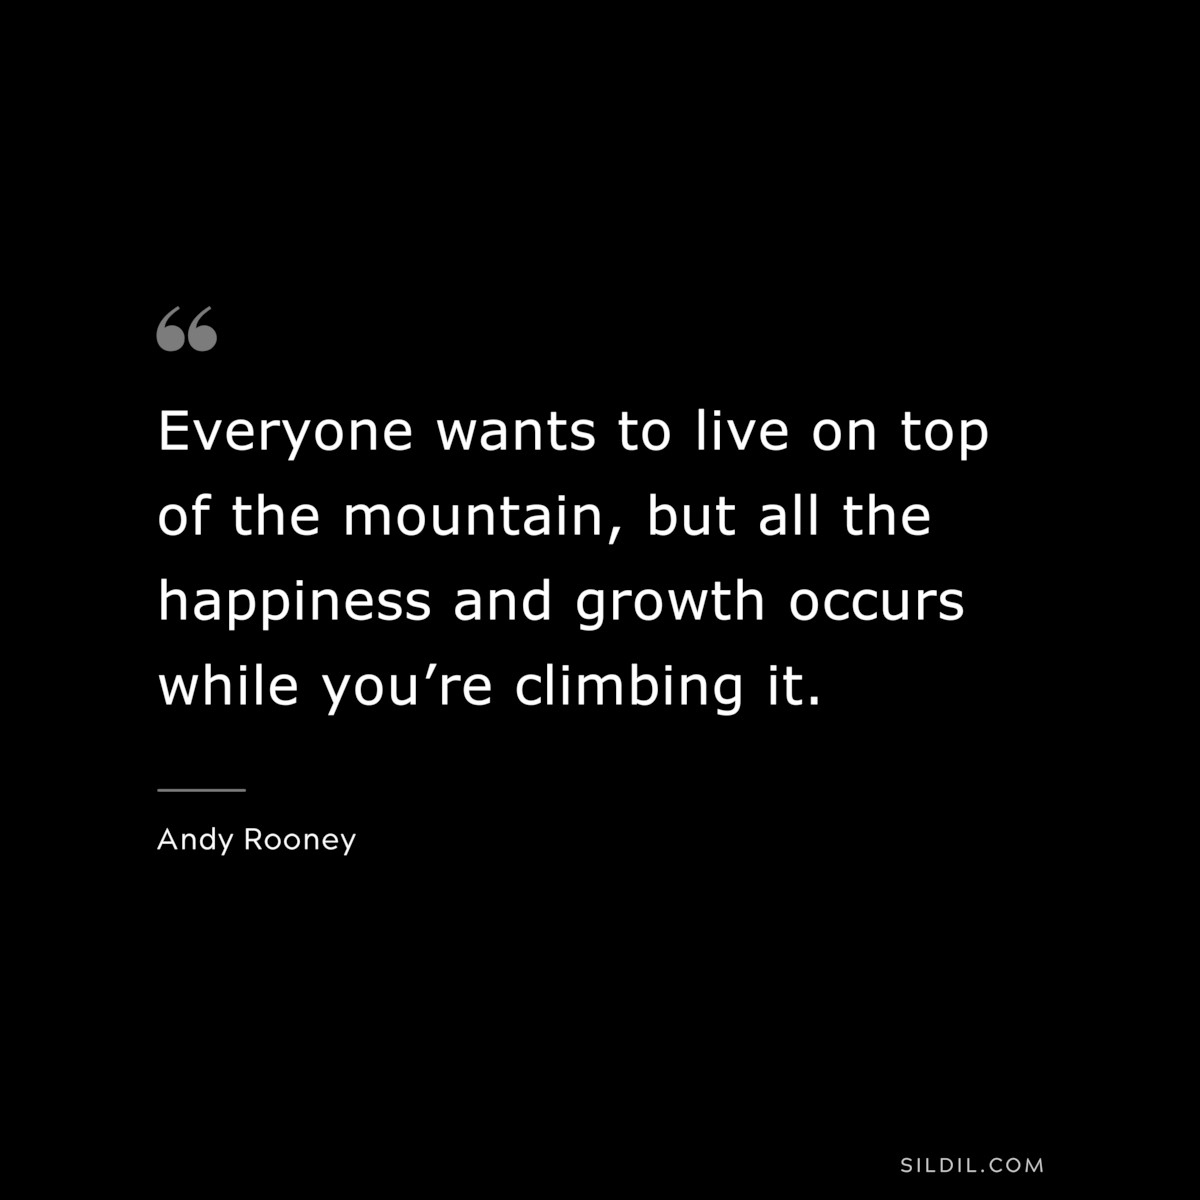 Everyone wants to live on top of the mountain, but all the happiness and growth occurs while you’re climbing it. ― Andy Rooney